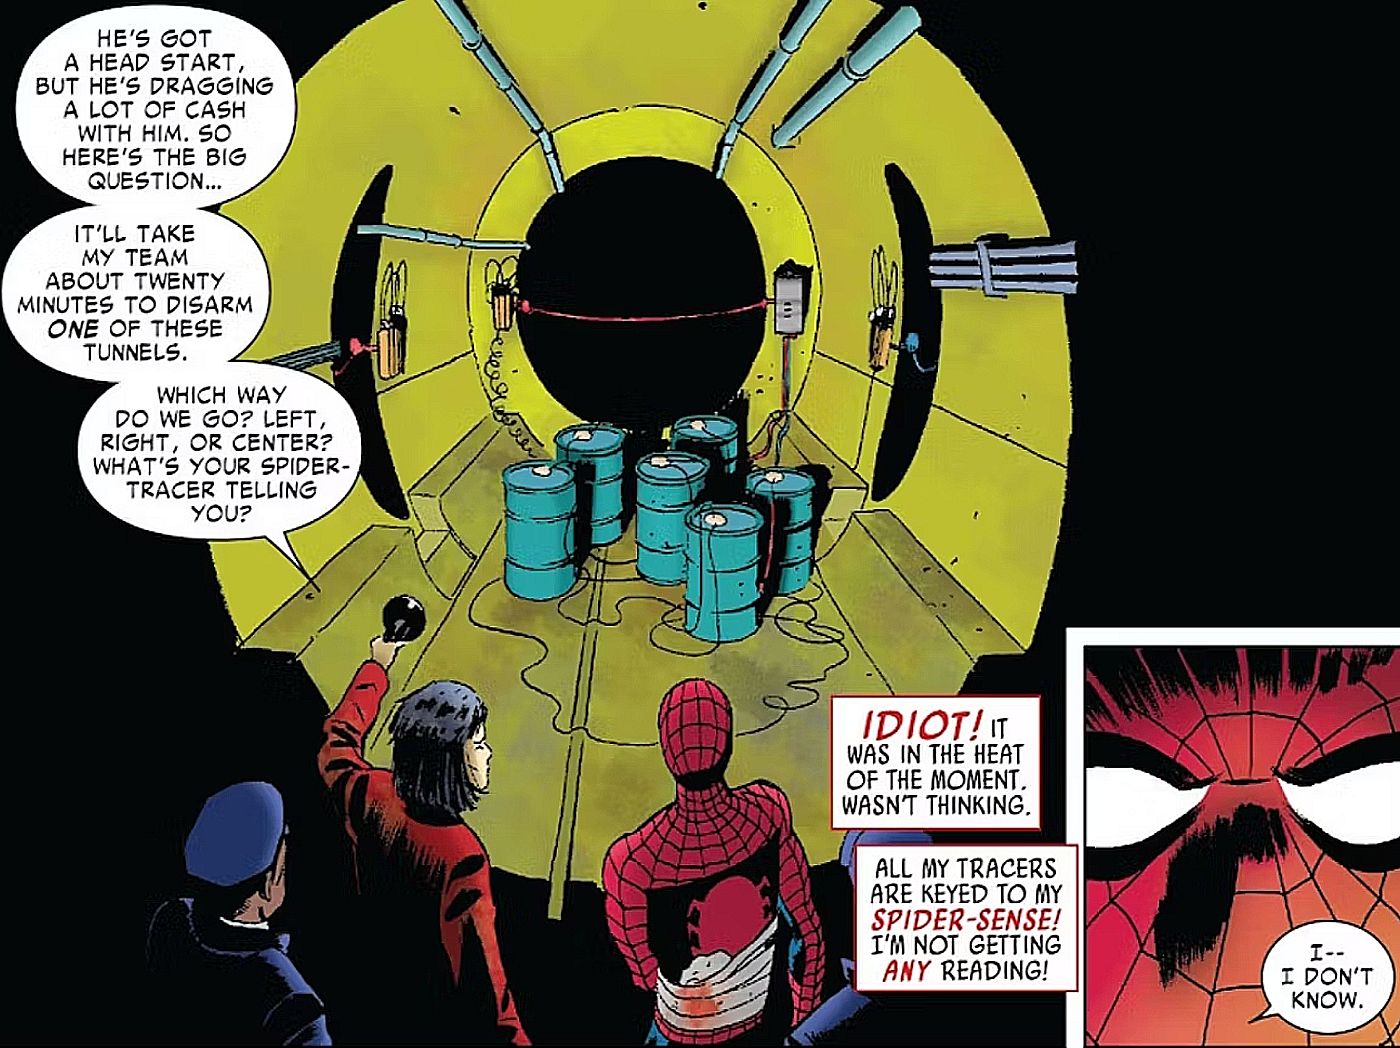 Amazing Spider-Man #656 Peter's trackers don't work without his spider-sense